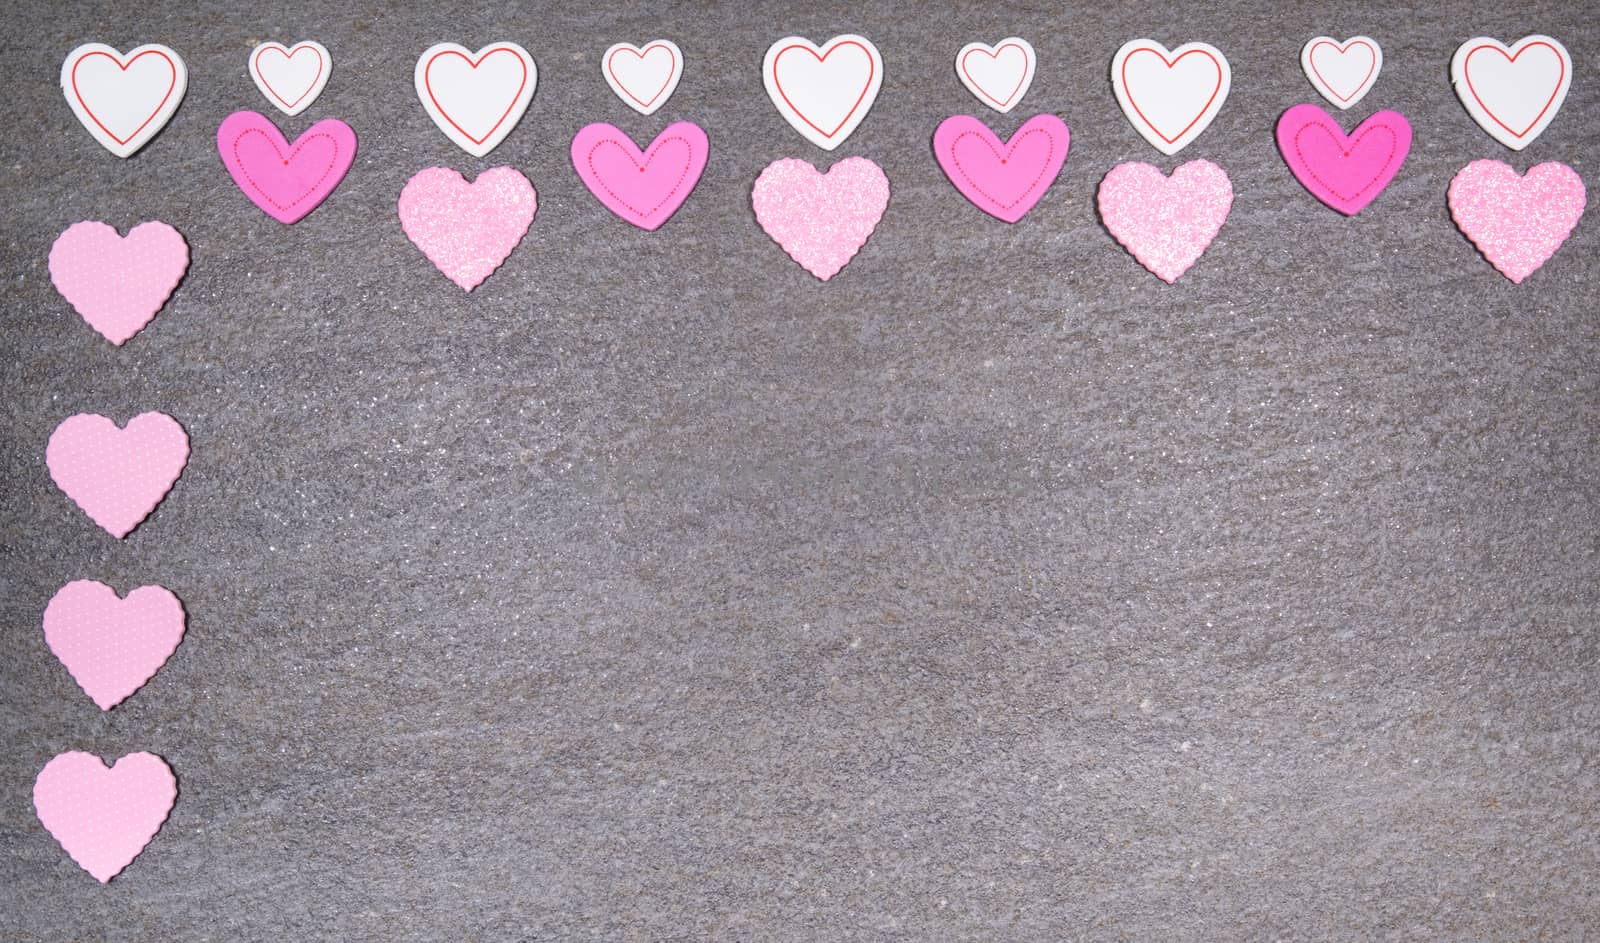 gray granite background with pink and white hearts for valentine by jp_chretien